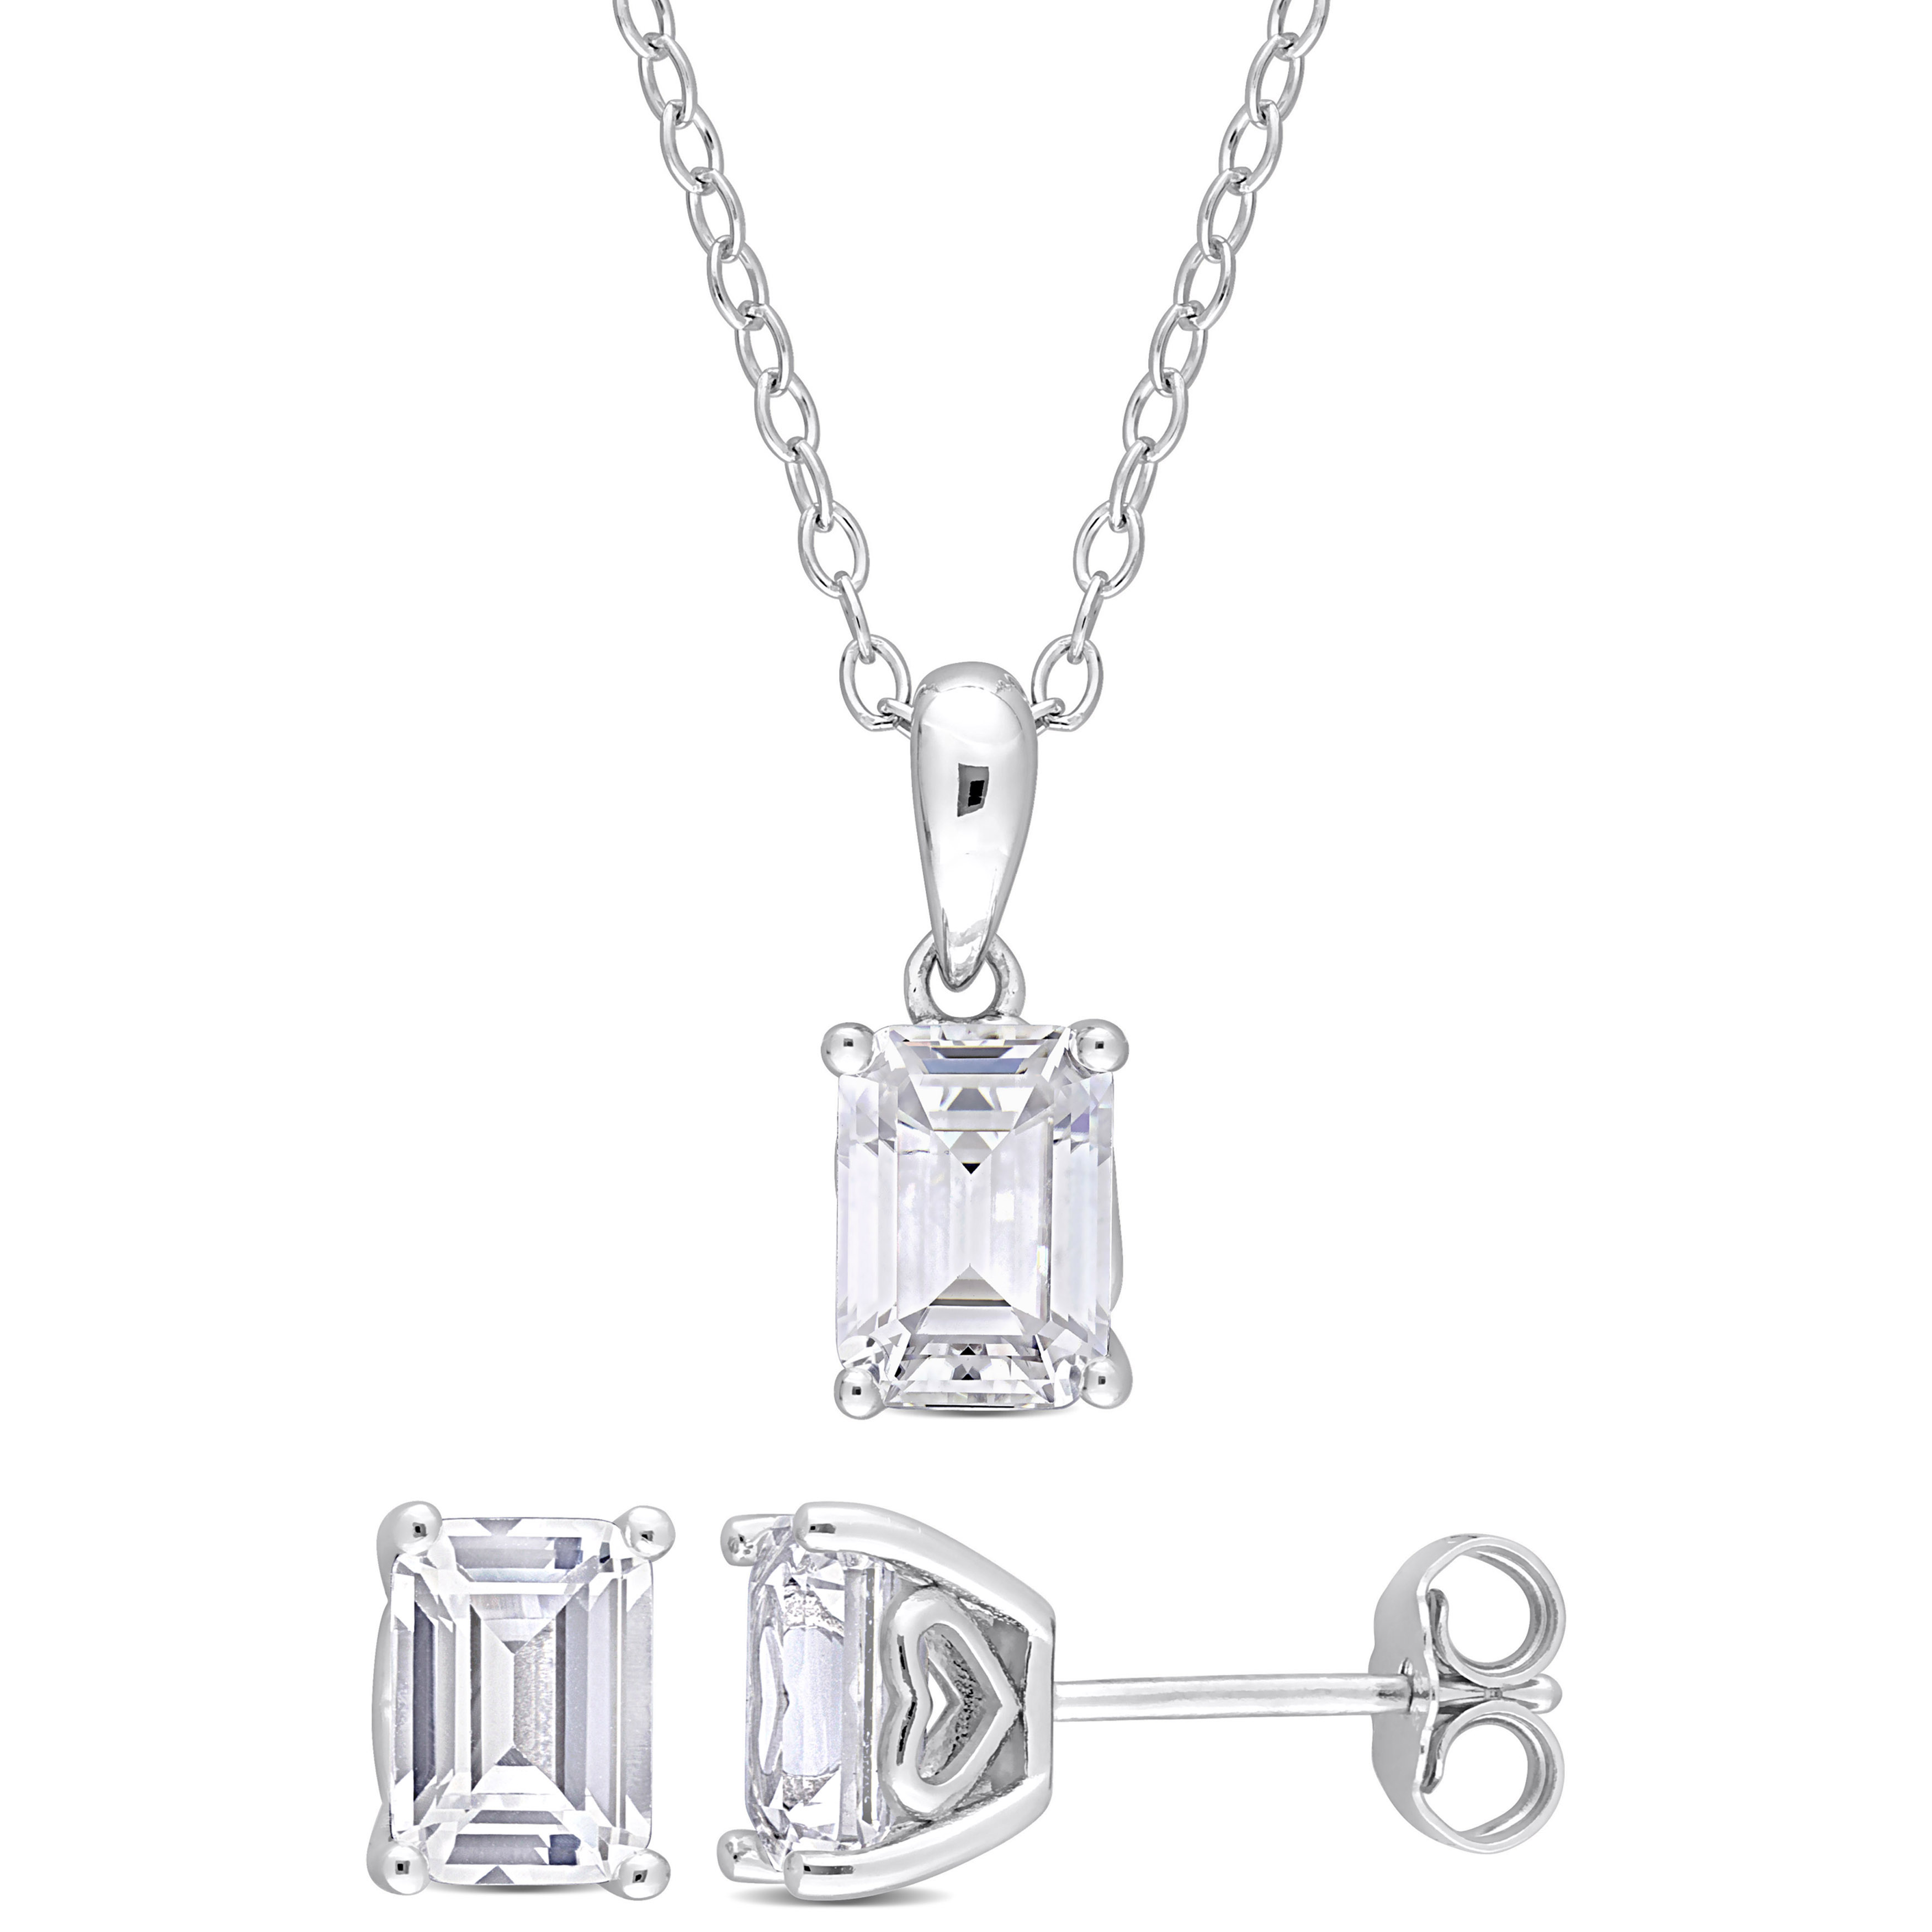 4 3/4 CT TGW Emerald-Cut and Octagon Created White Sapphire 2-Piece Solitaire Pendant with Chain and Stud Earrings Set in Sterling Silver